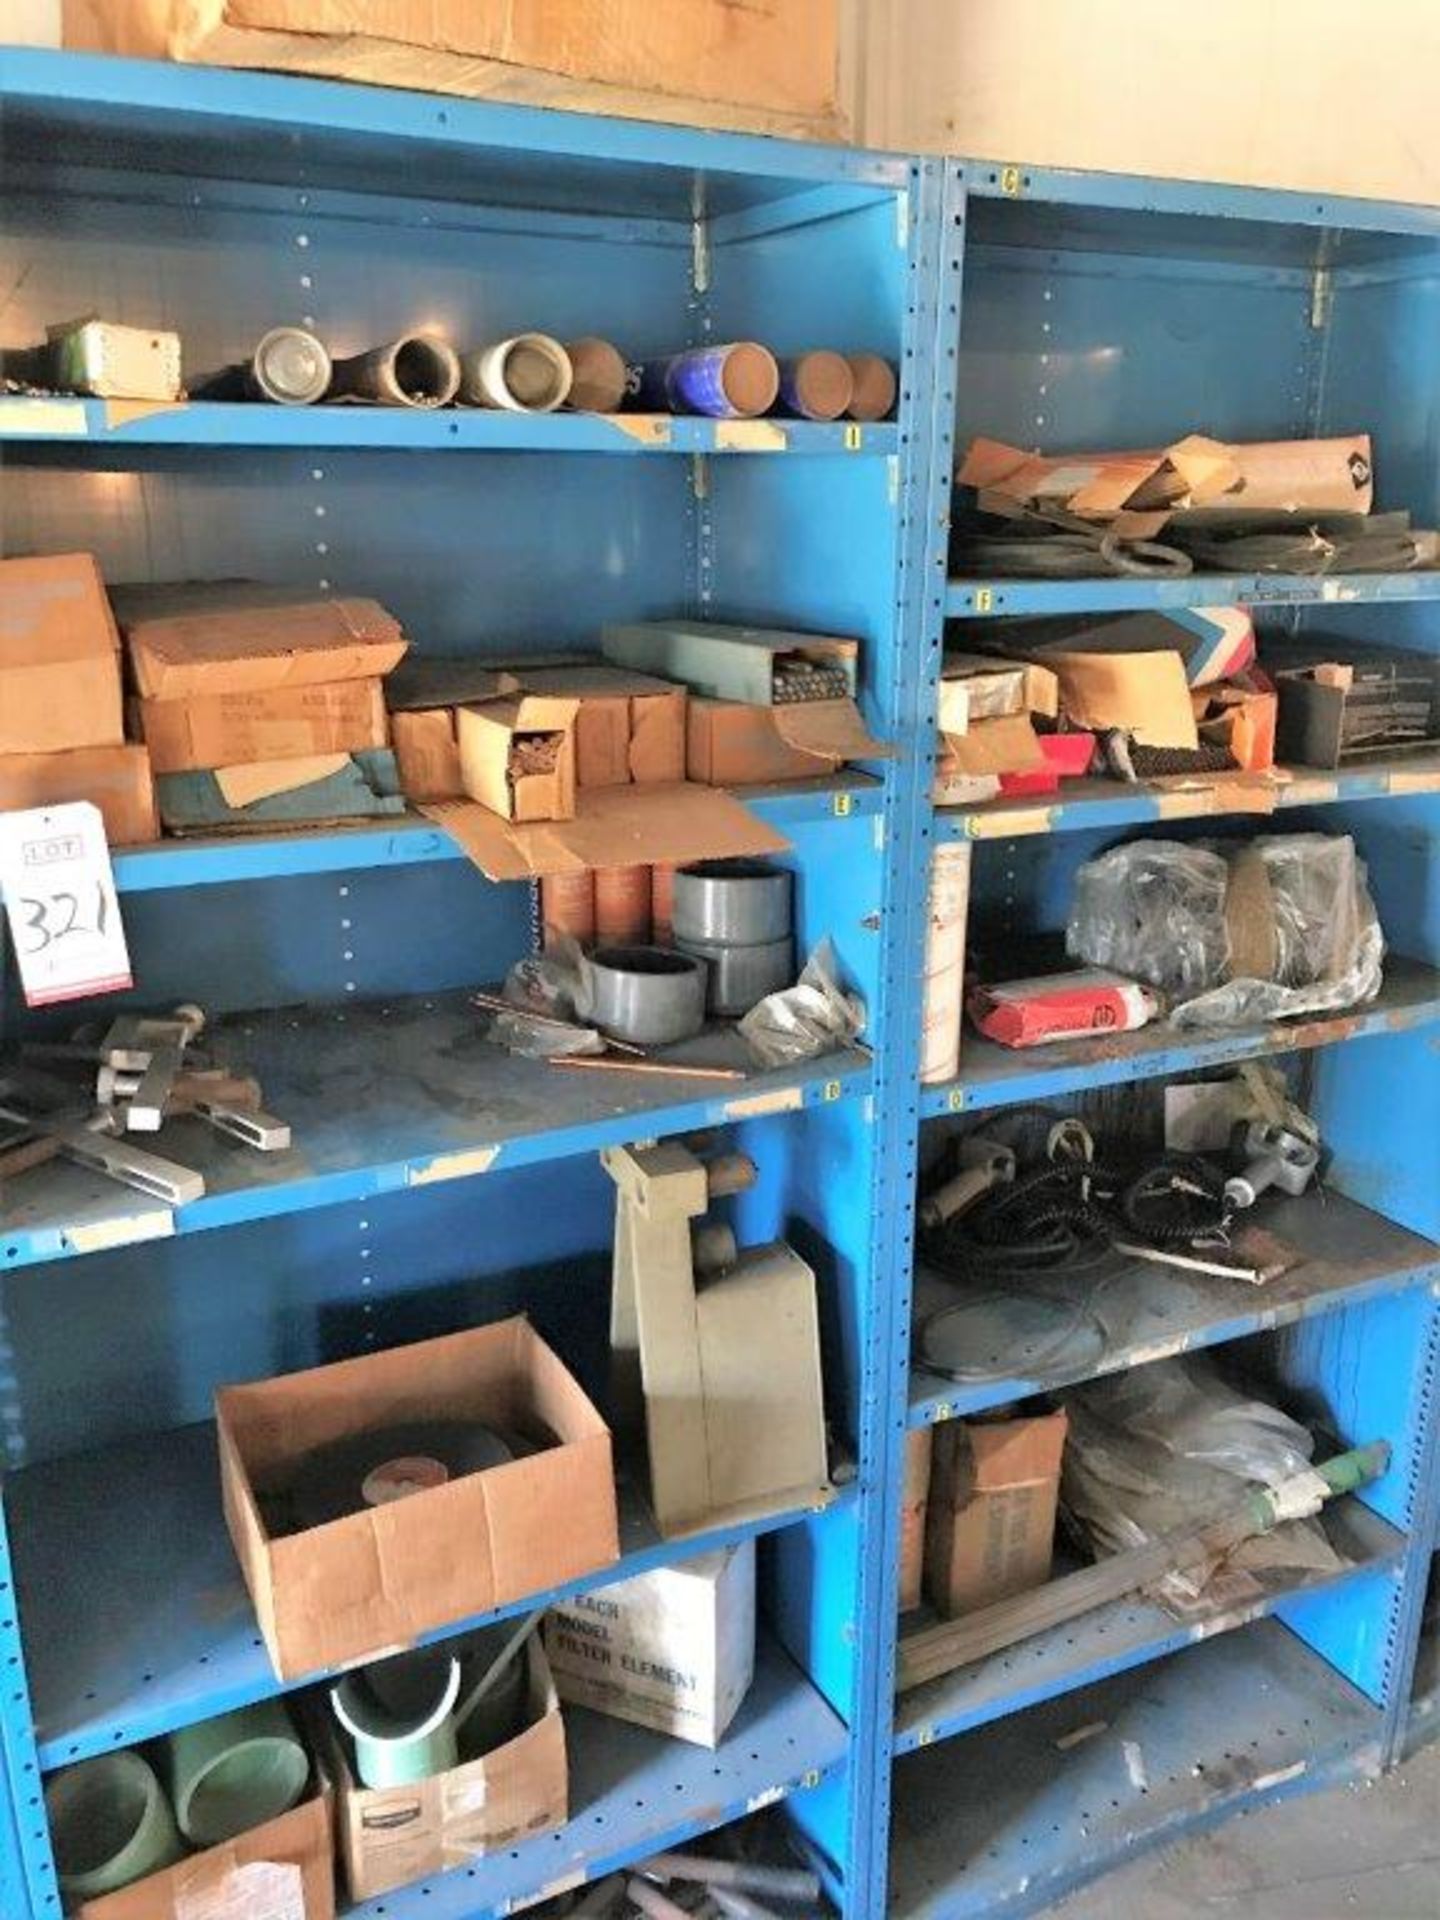 LOT - (6) SECTIONS SHELVING W/ CONTENTS OF WELDING SUPPLIES, TORCH TIPS, WELD GUN & LEEDS, TORCH - Image 3 of 3